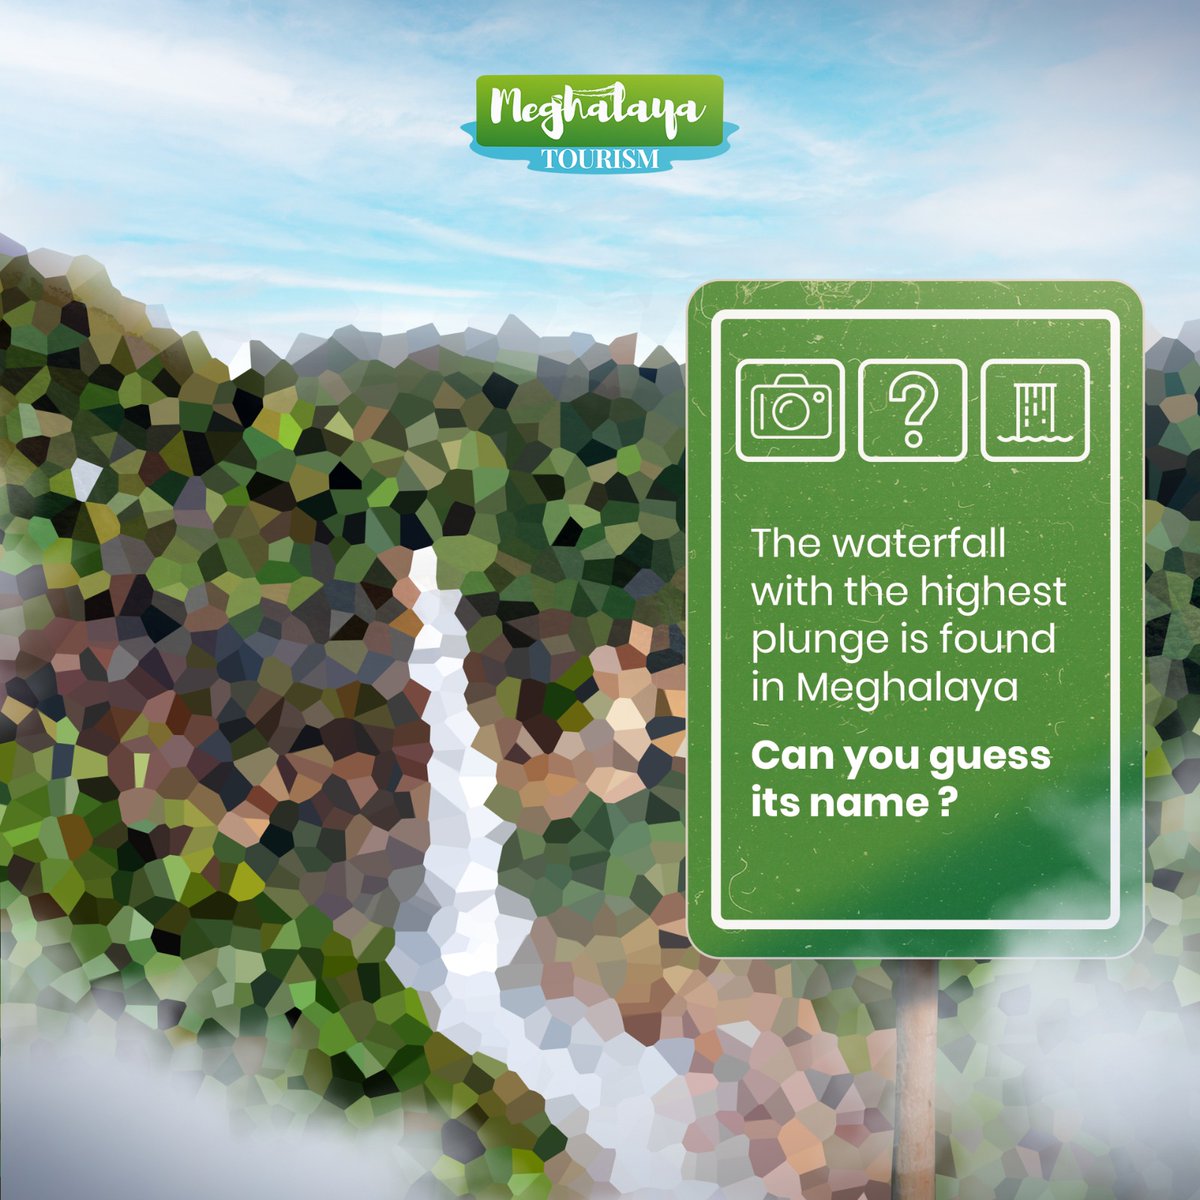 #TriviaTuesday The waterfall with the highest plunge is found in Meghalaya. Can you guess the name of this waterfall? Hint: It is one of Meghalaya’s most famous waterfall. #Trivia #Meghalaya #IncredibleIndia